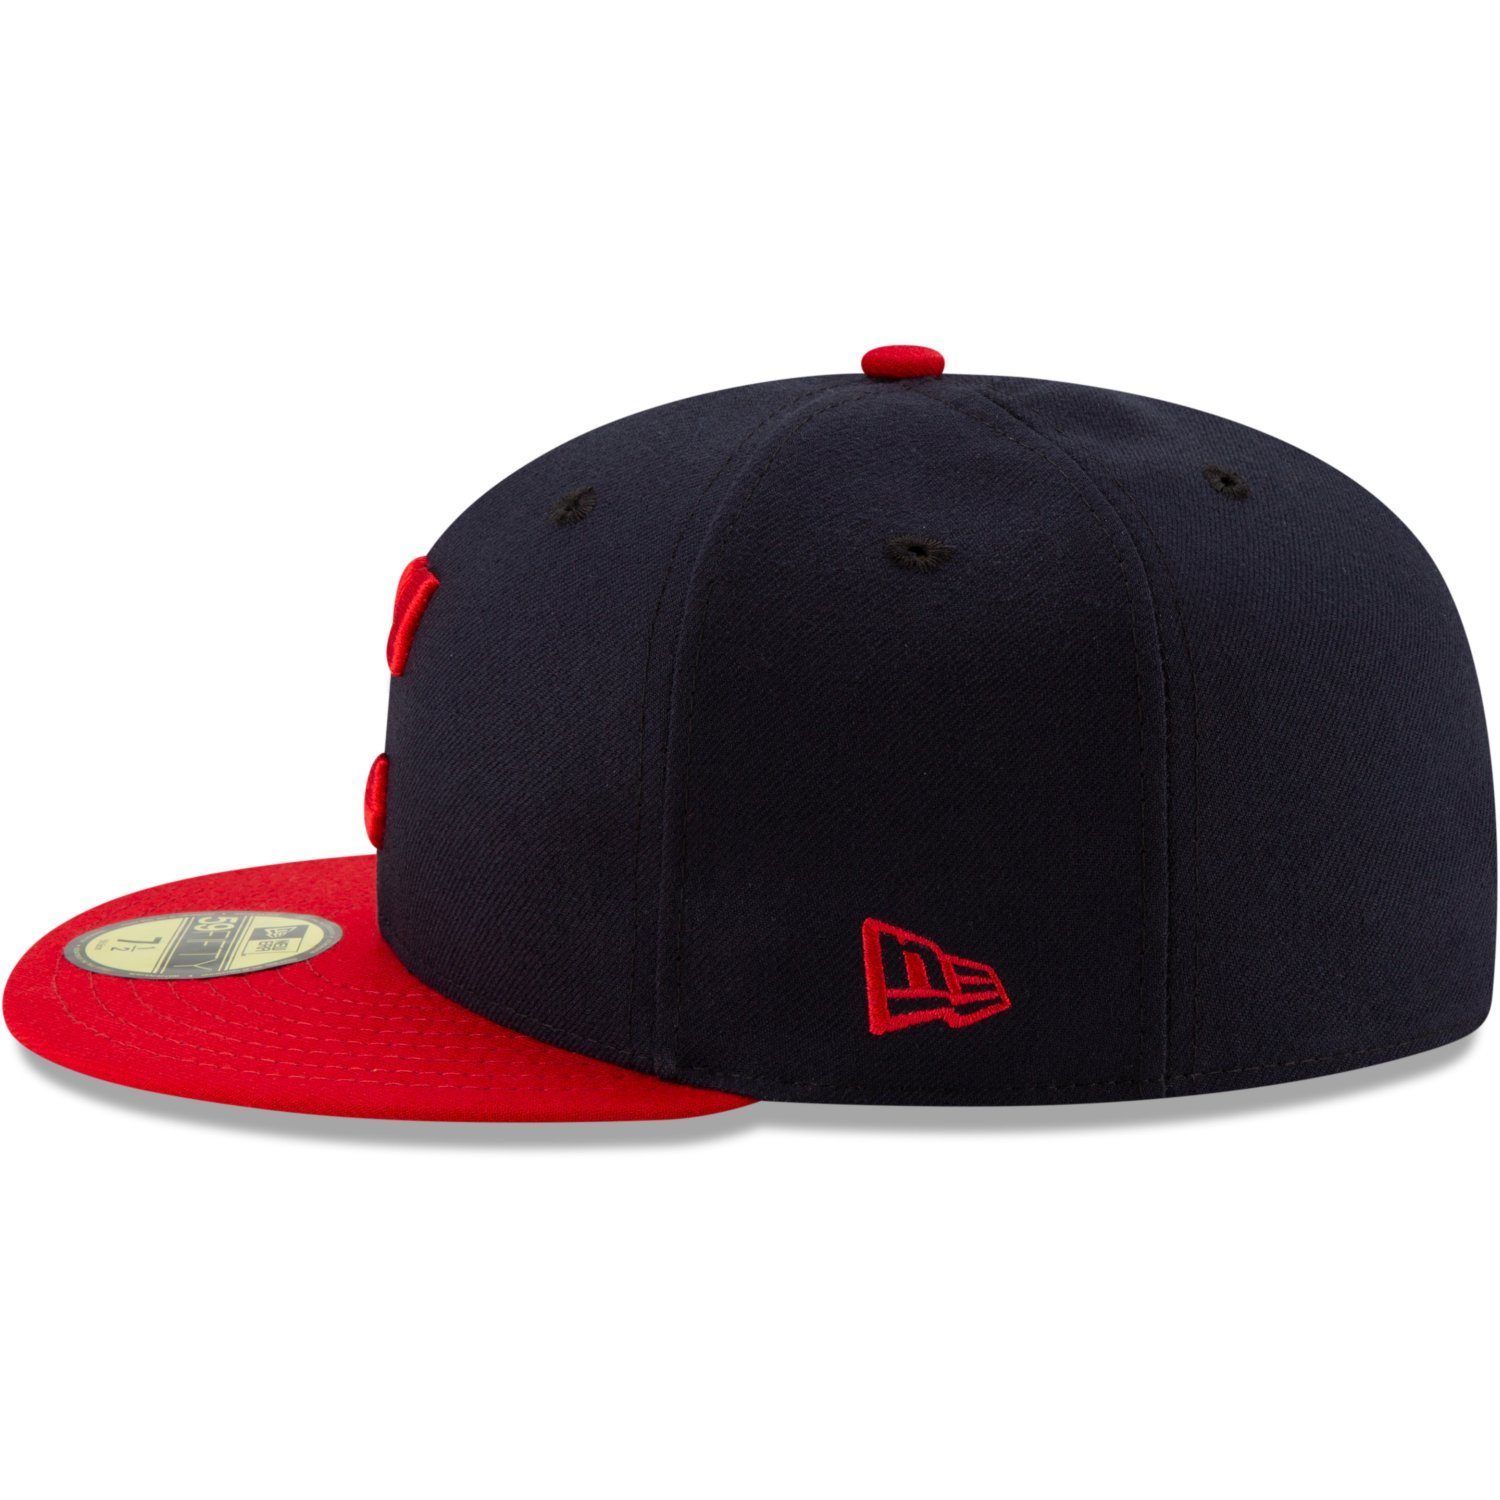 Herren Caps New Era Fitted Cap 59Fifty AUTHENTIC ONFIELD Cleveland Indians